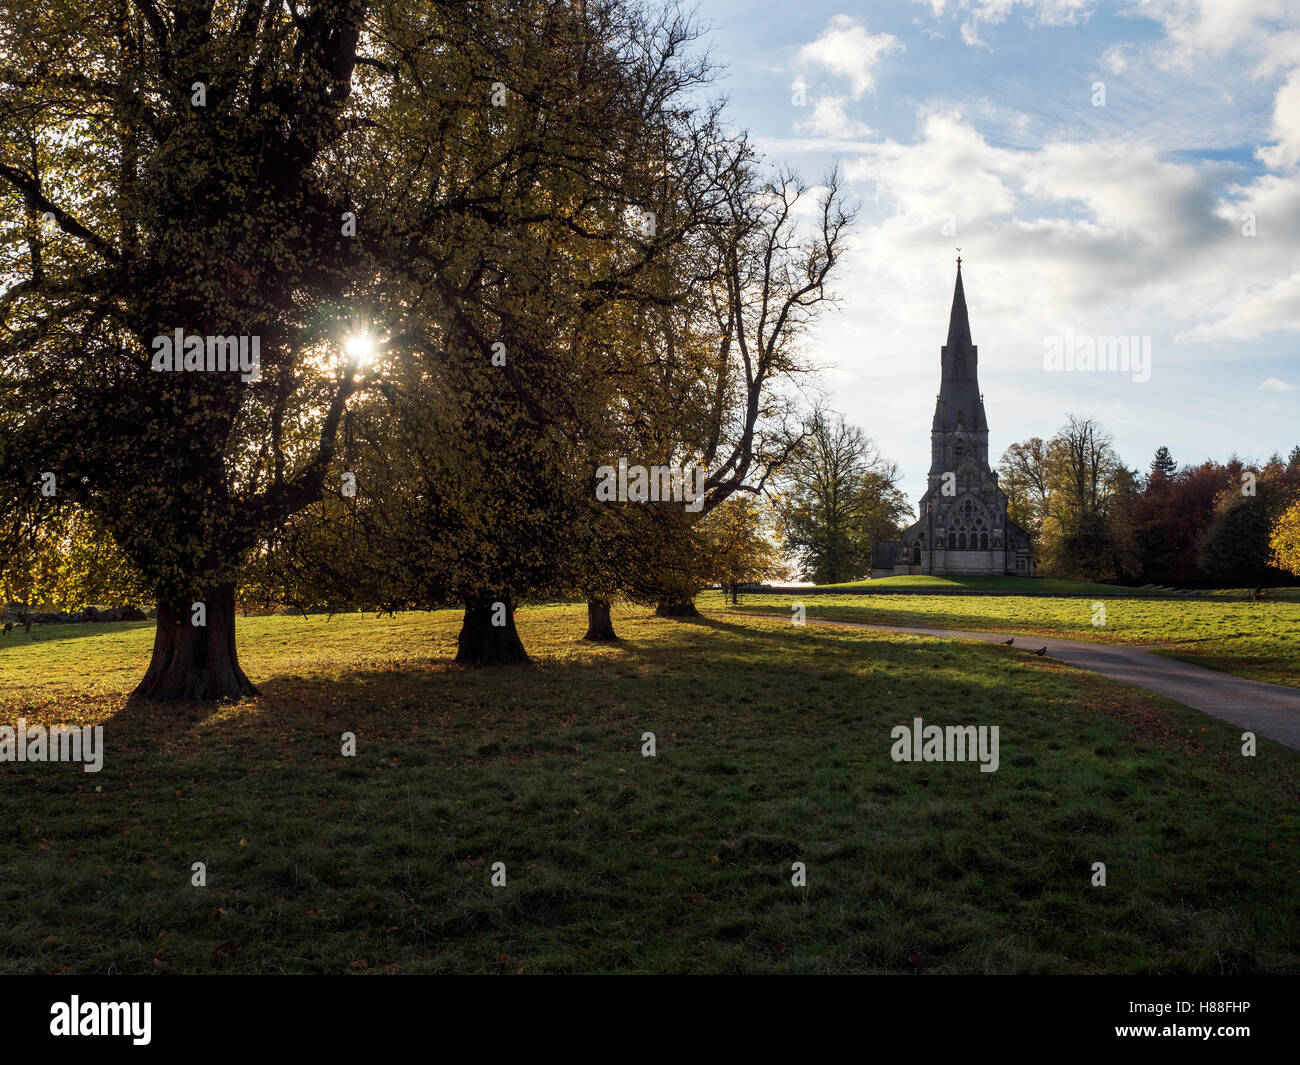 St Marys Church at Studley Royal on an AUtumn Afternoon Ripon Yorkshire England Stock Photo